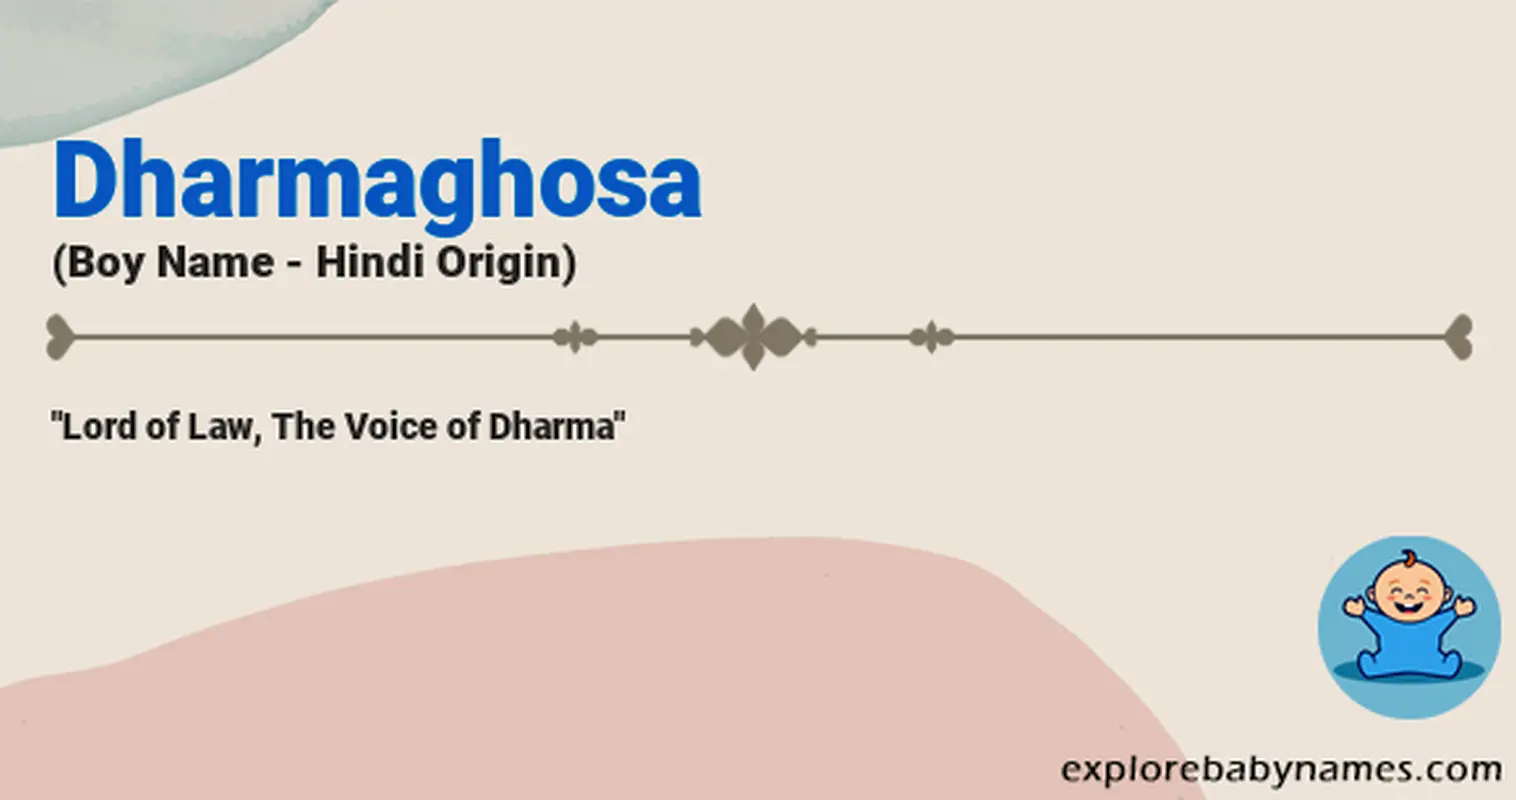 Meaning of Dharmaghosa